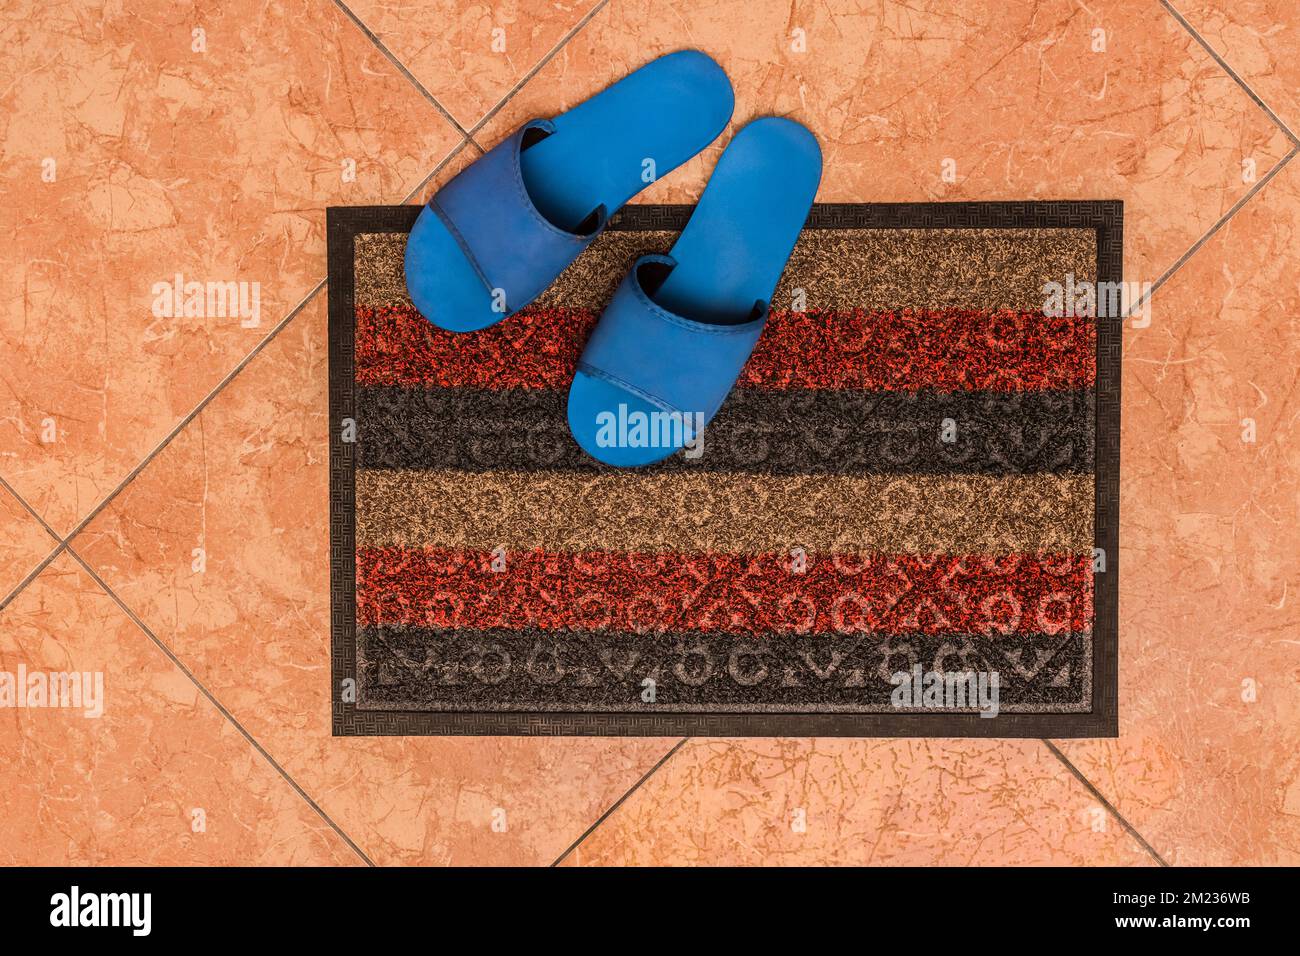 Blue homemade slippers stand on the foot carpet against the background of the floor tiles, the top view from above. Stock Photo